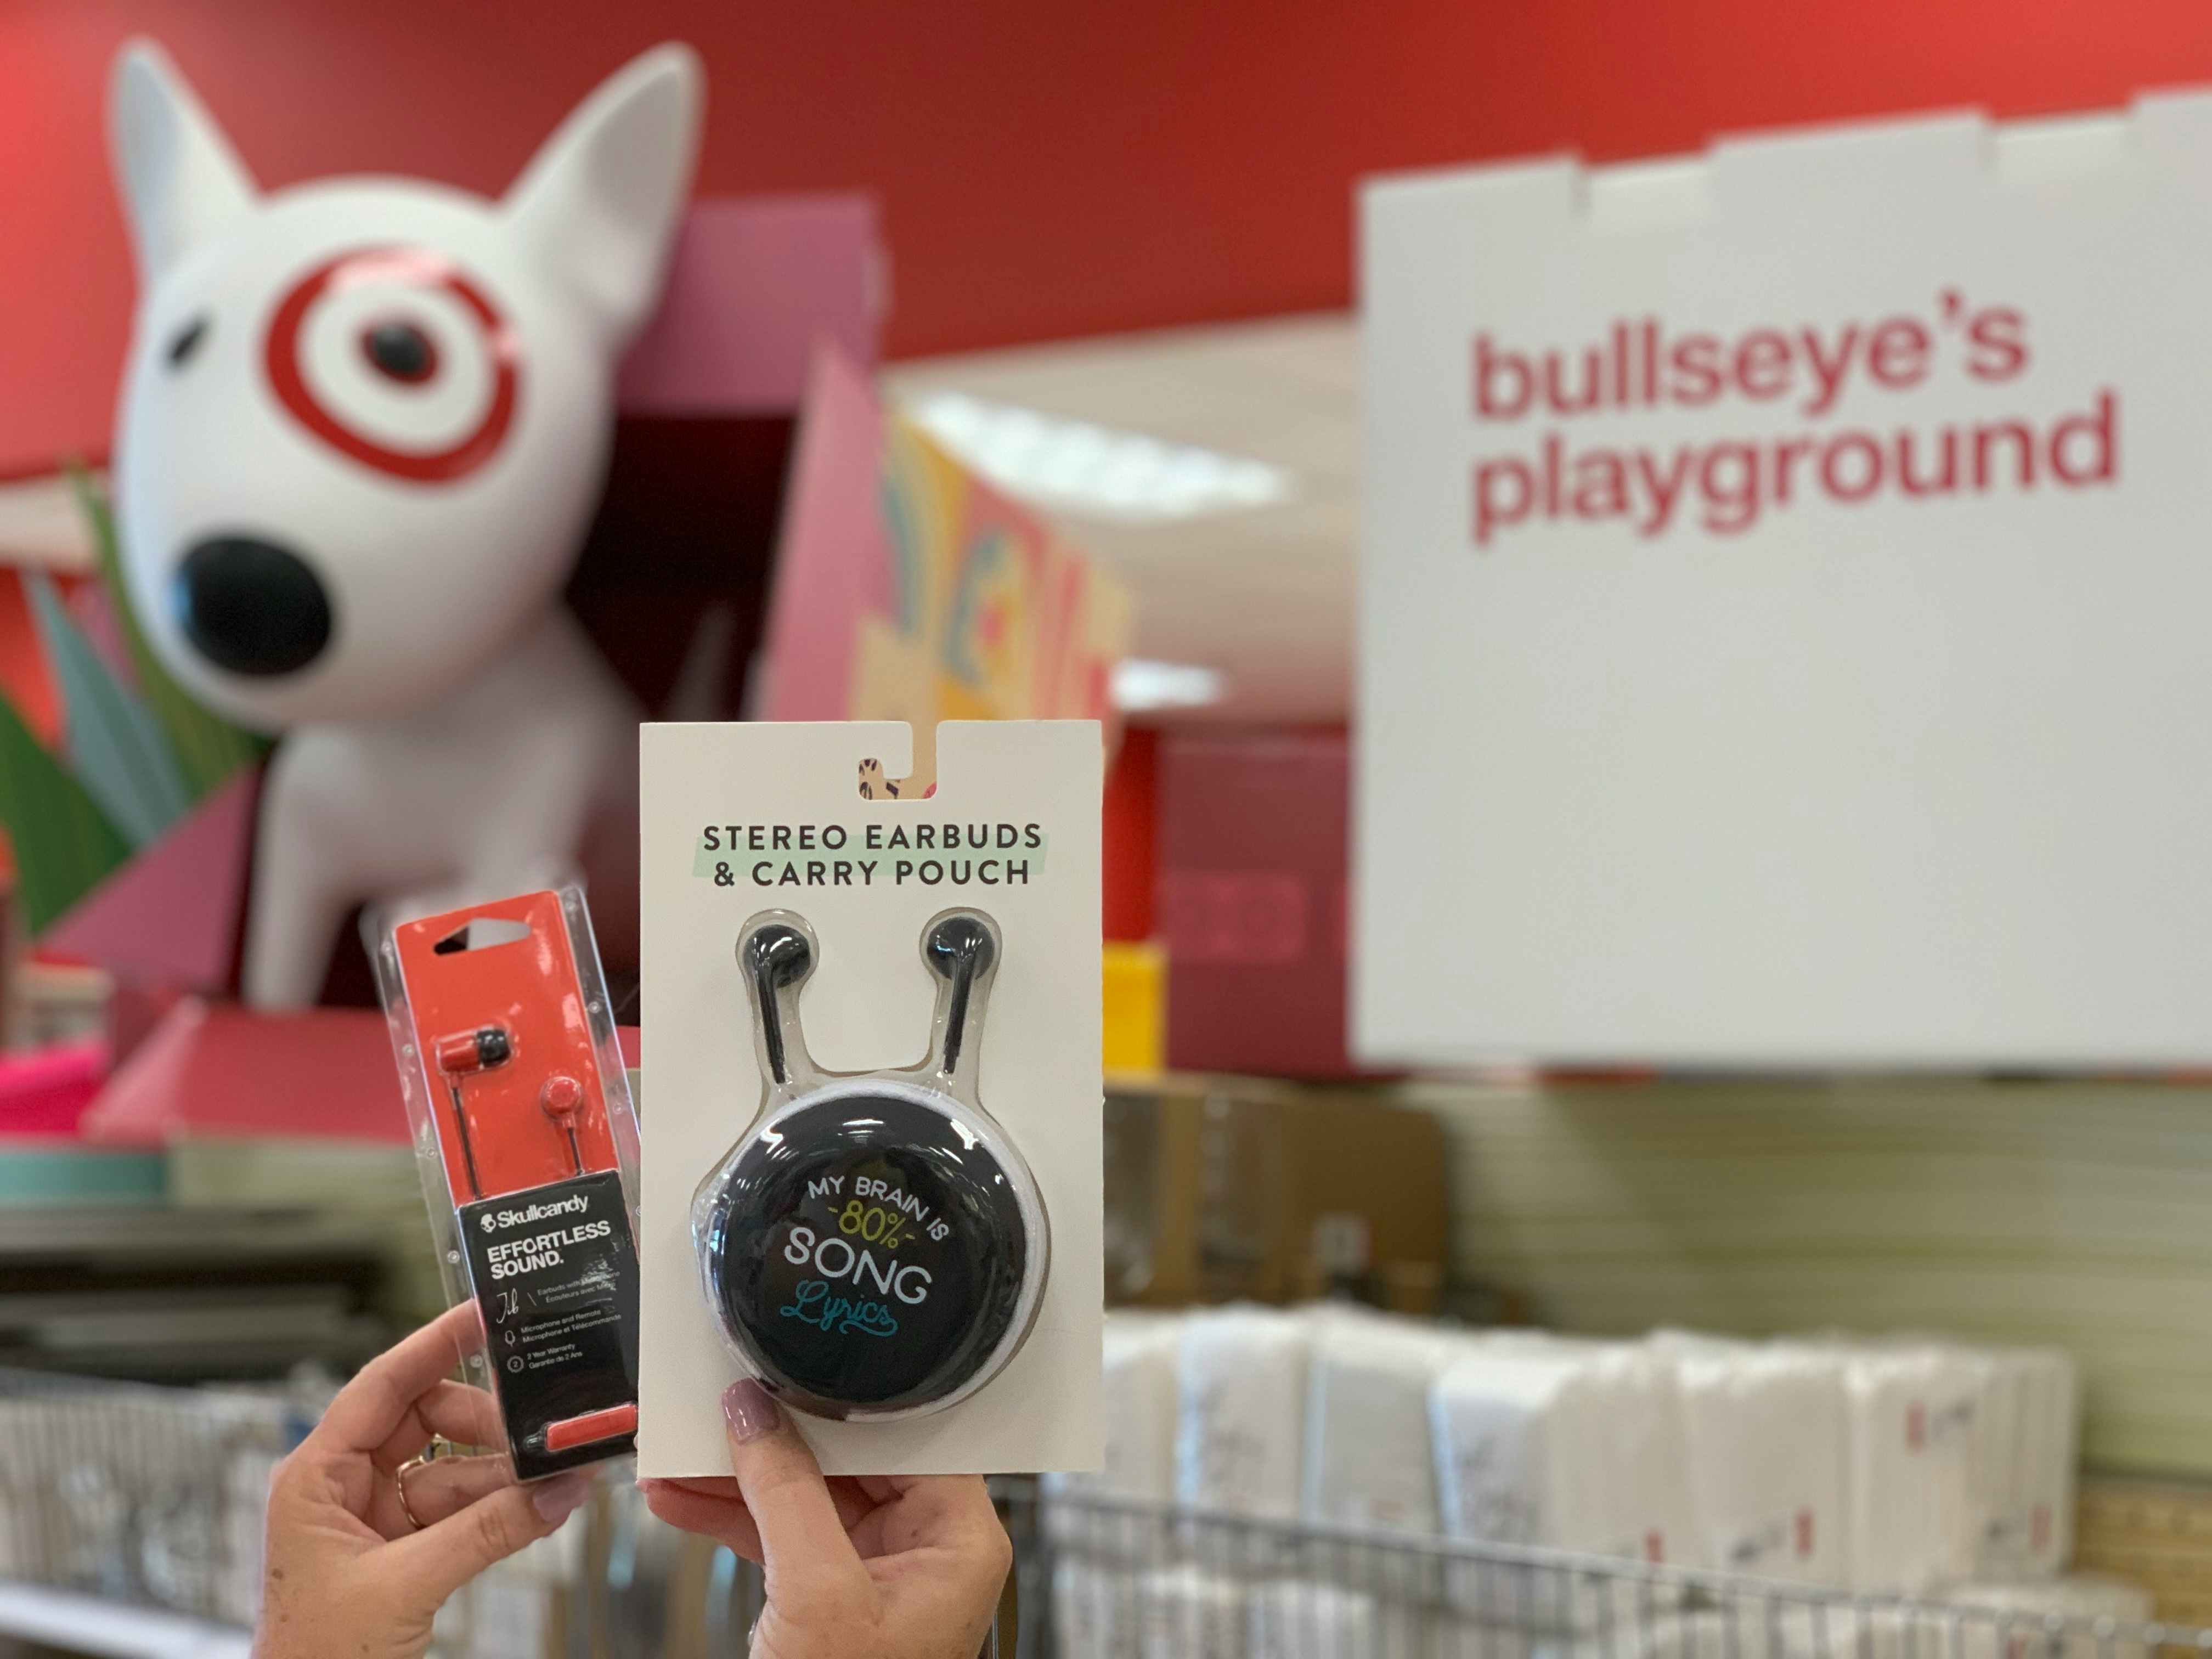 hands holding earbud headphones in front of bullseyes playground display in target store